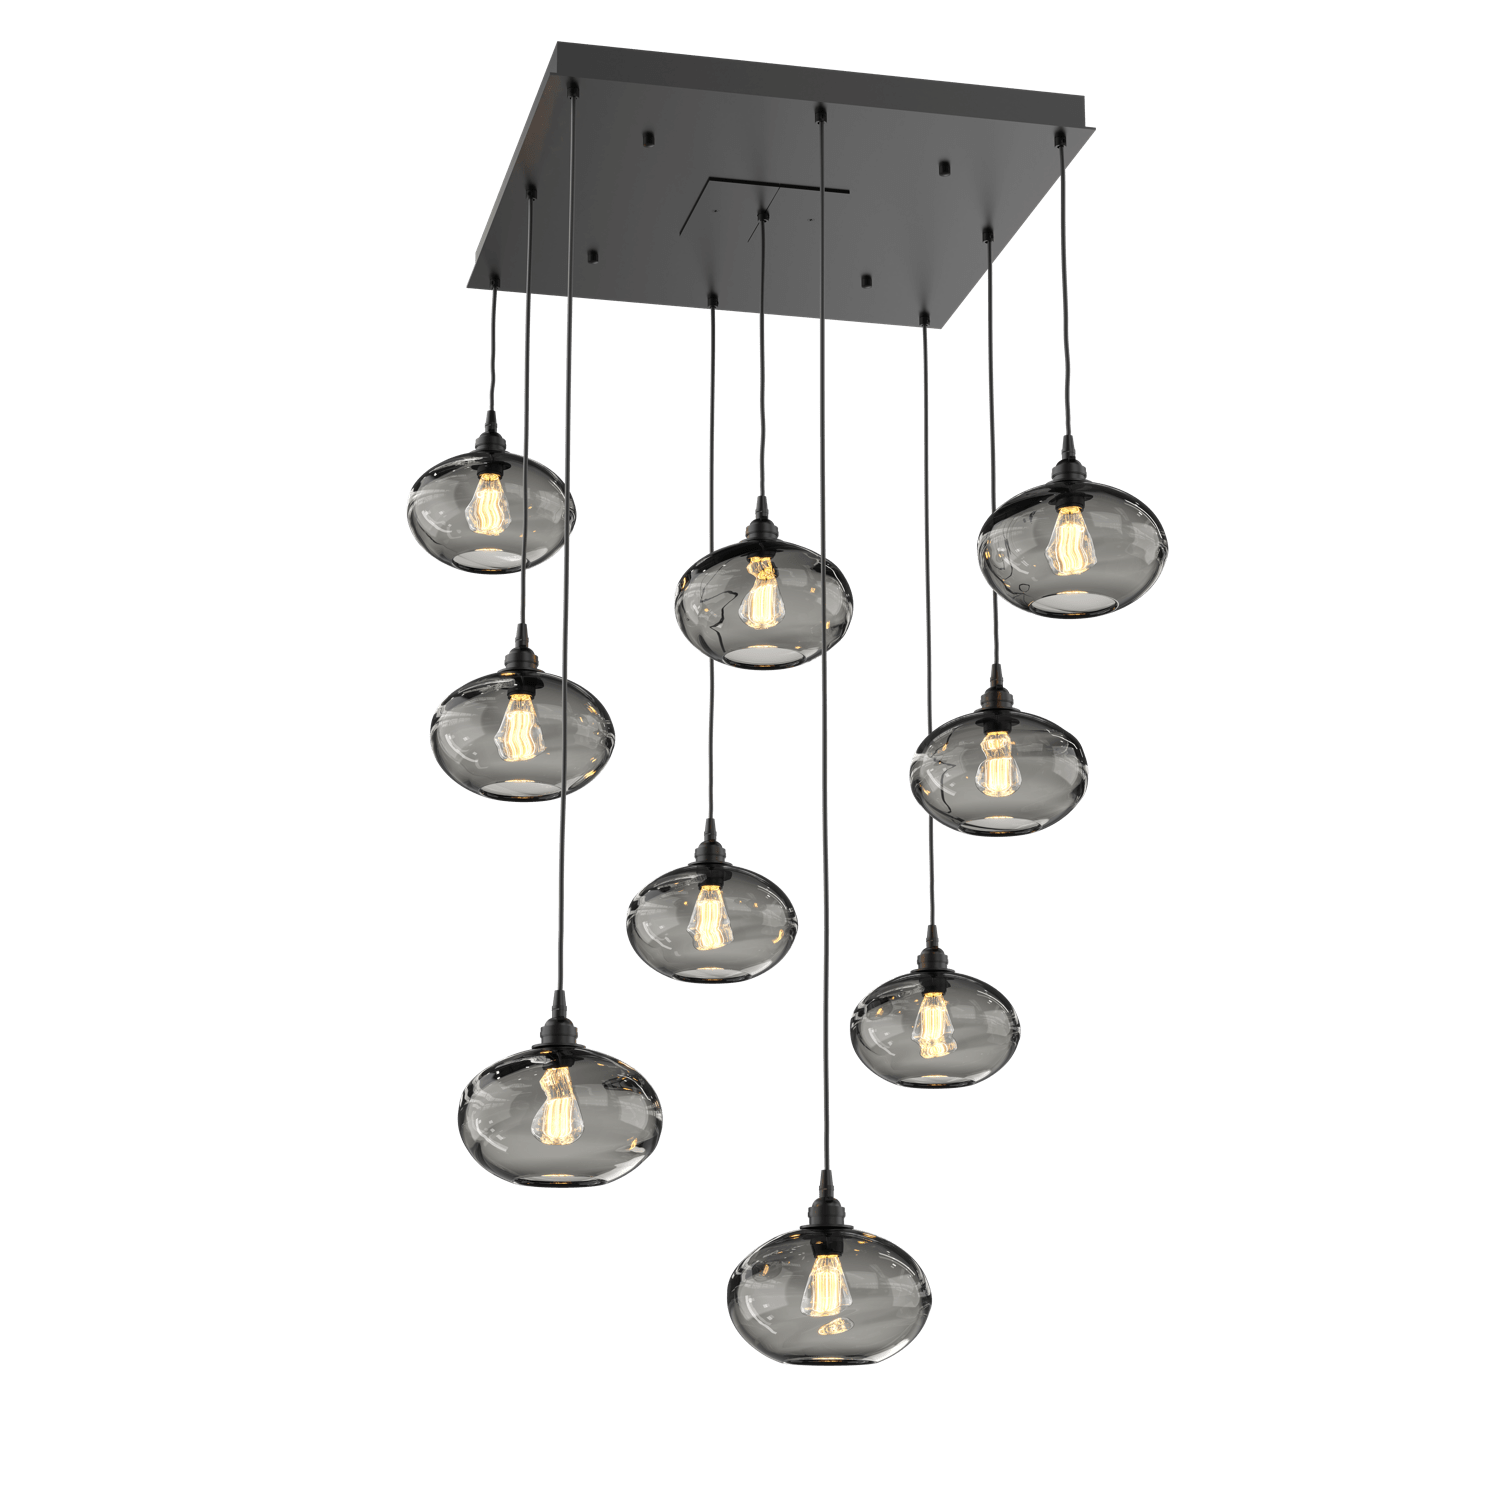 CHB0036-09-MB-OS-Hammerton-Studio-Optic-Blown-Glass-Coppa-9-light-square-pendant-chandelier-with-matte-black-finish-and-optic-smoke-blown-glass-shades-and-incandescent-lamping